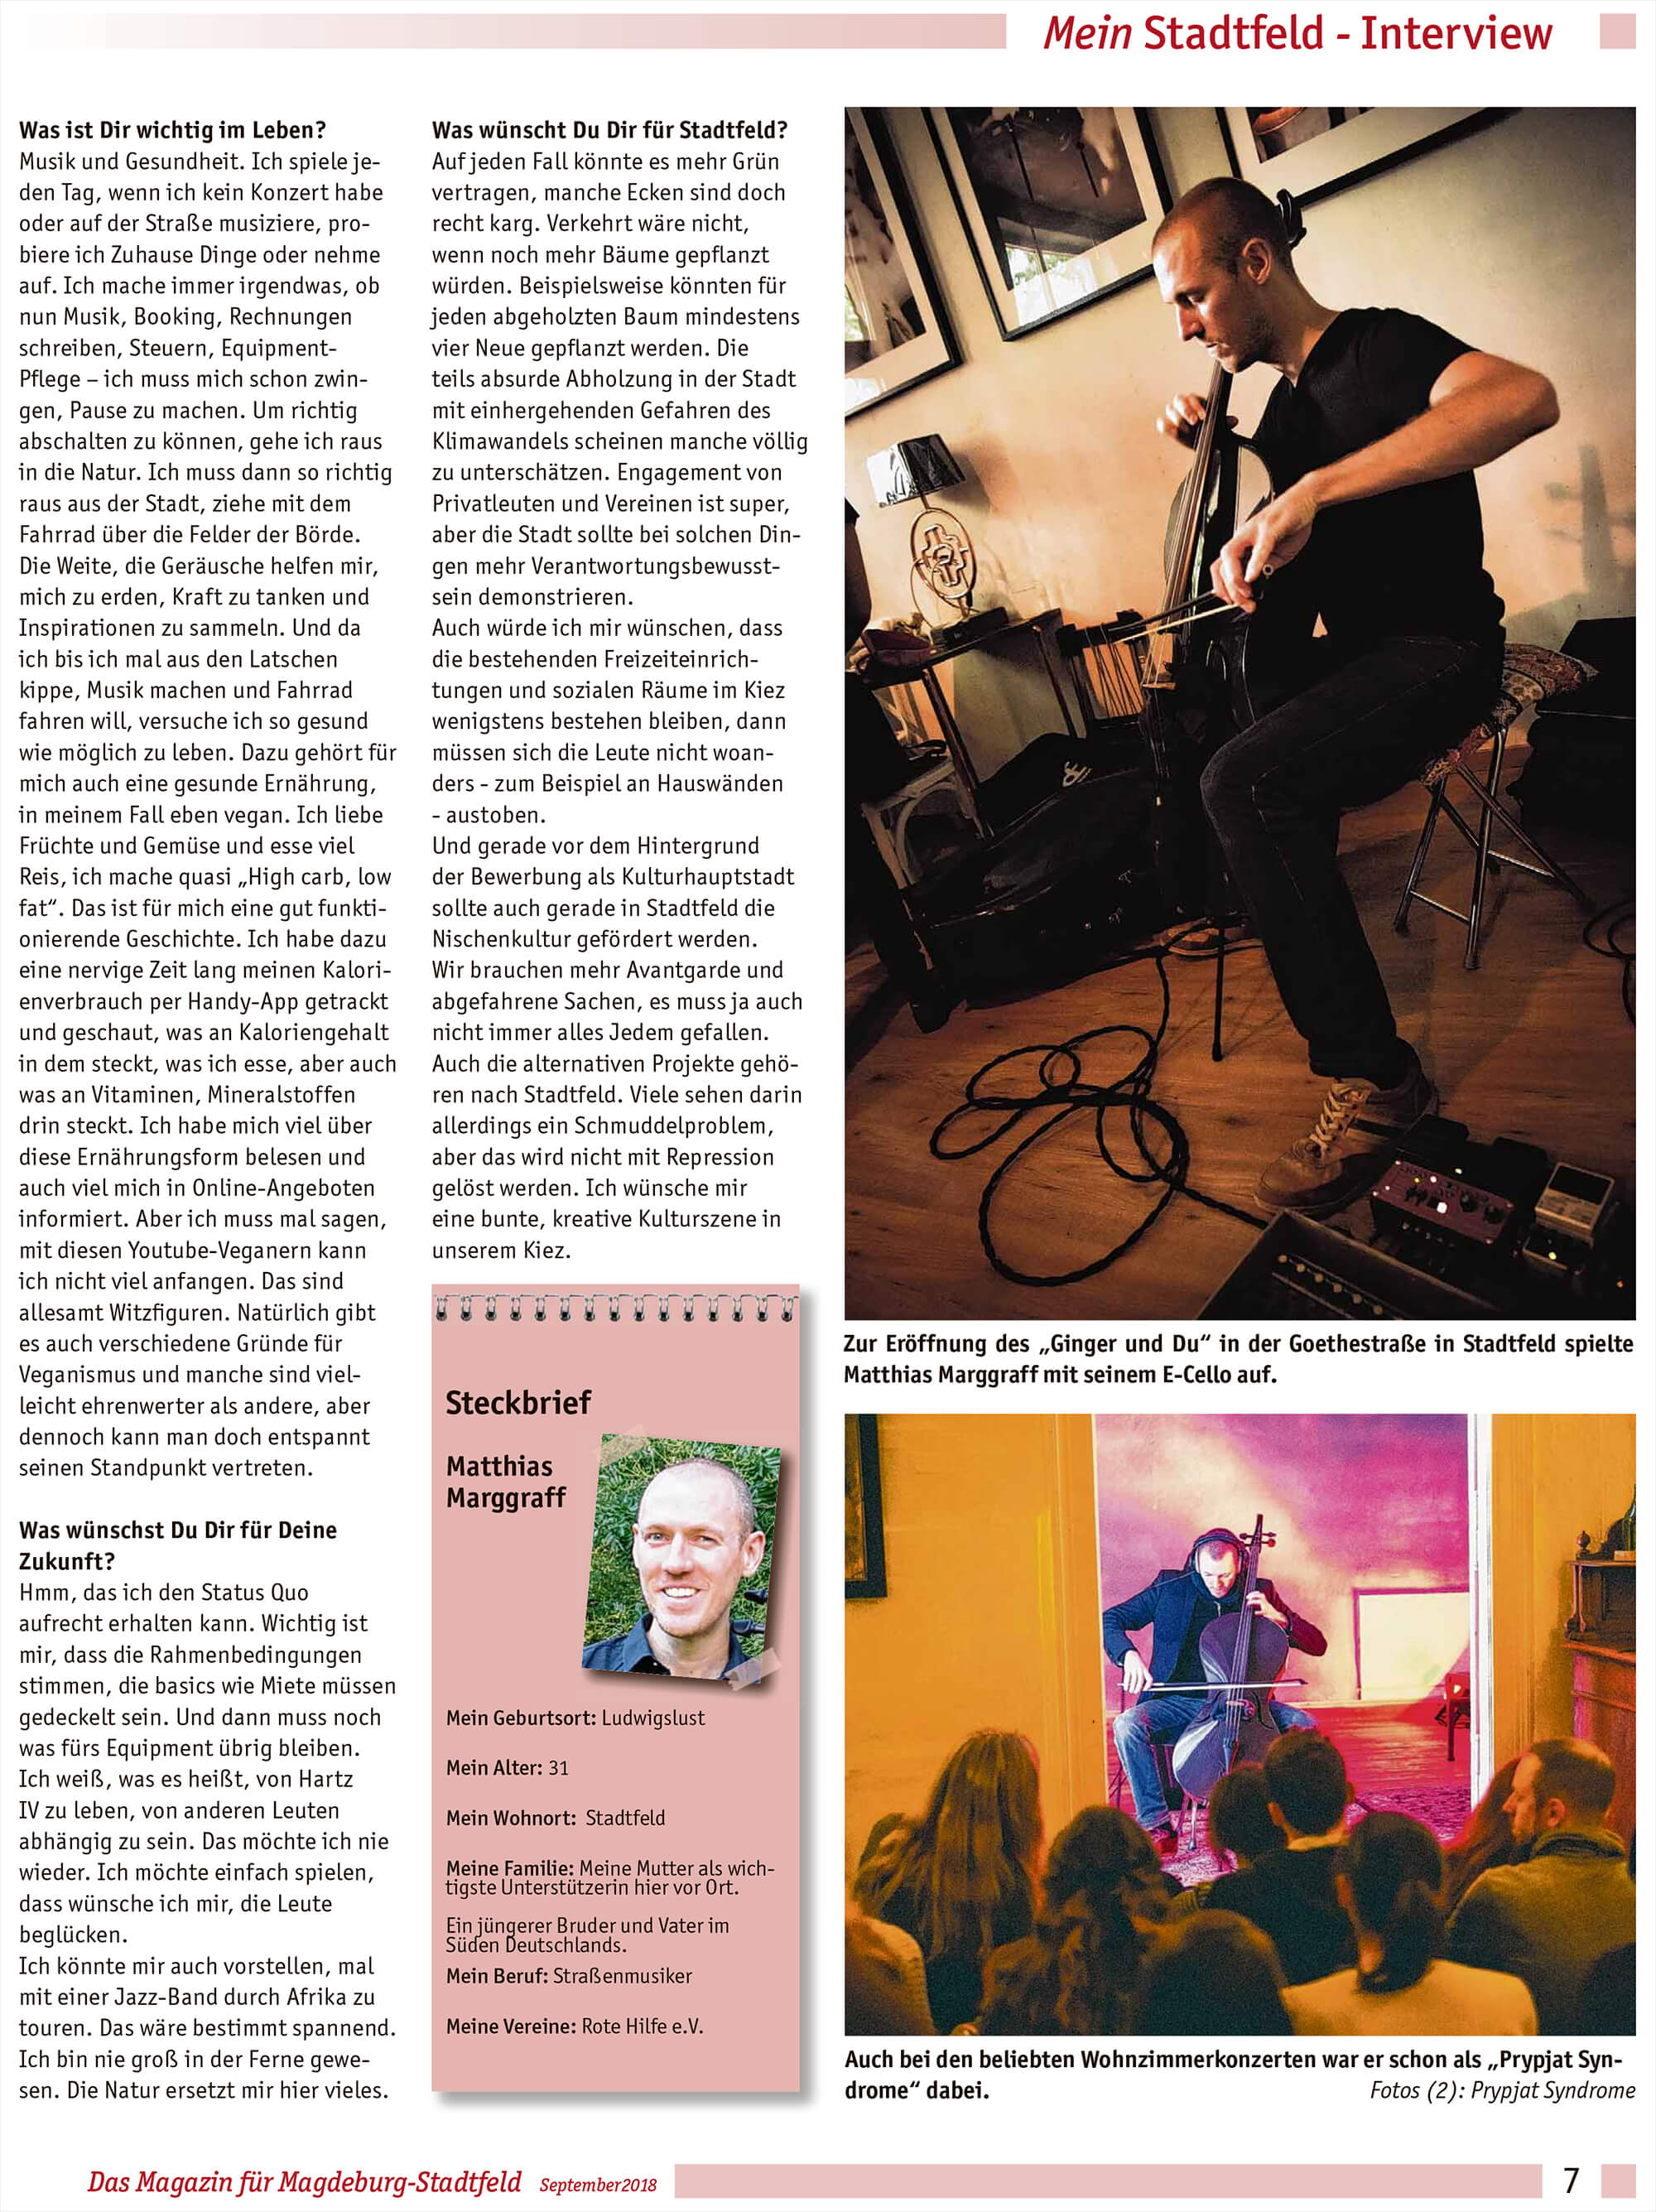 presse-prypjat-syndrome-mein-stadtfeld-2018-09-page-03-interview-tinyfied